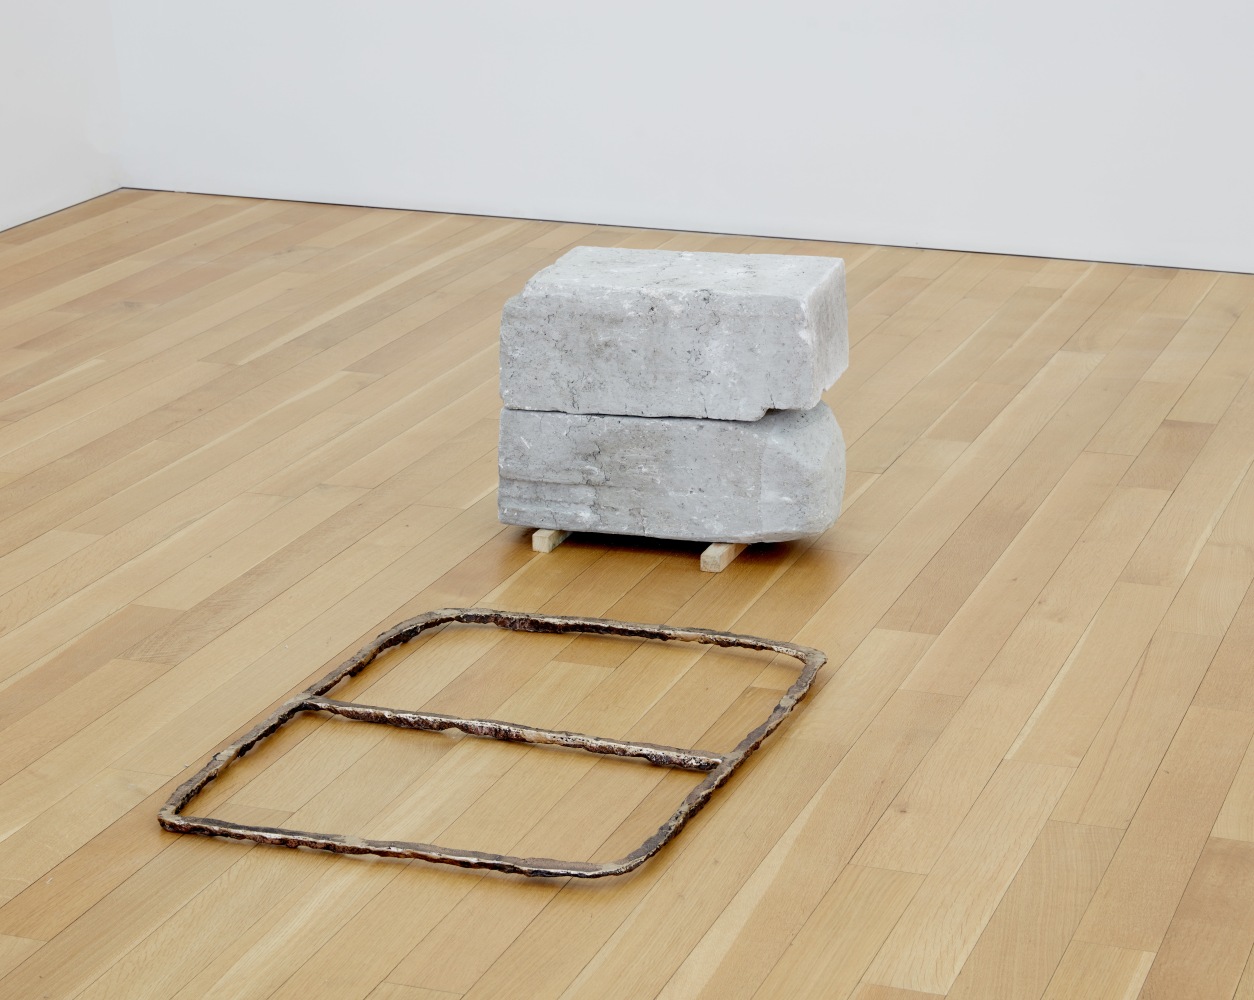 Esther Kläs BEGINNINGS, 2021 concrete, bronze, pigment and wood ​​​​​​​18 x 68 x 27 inches (46 x 173 x 69 cm), overall